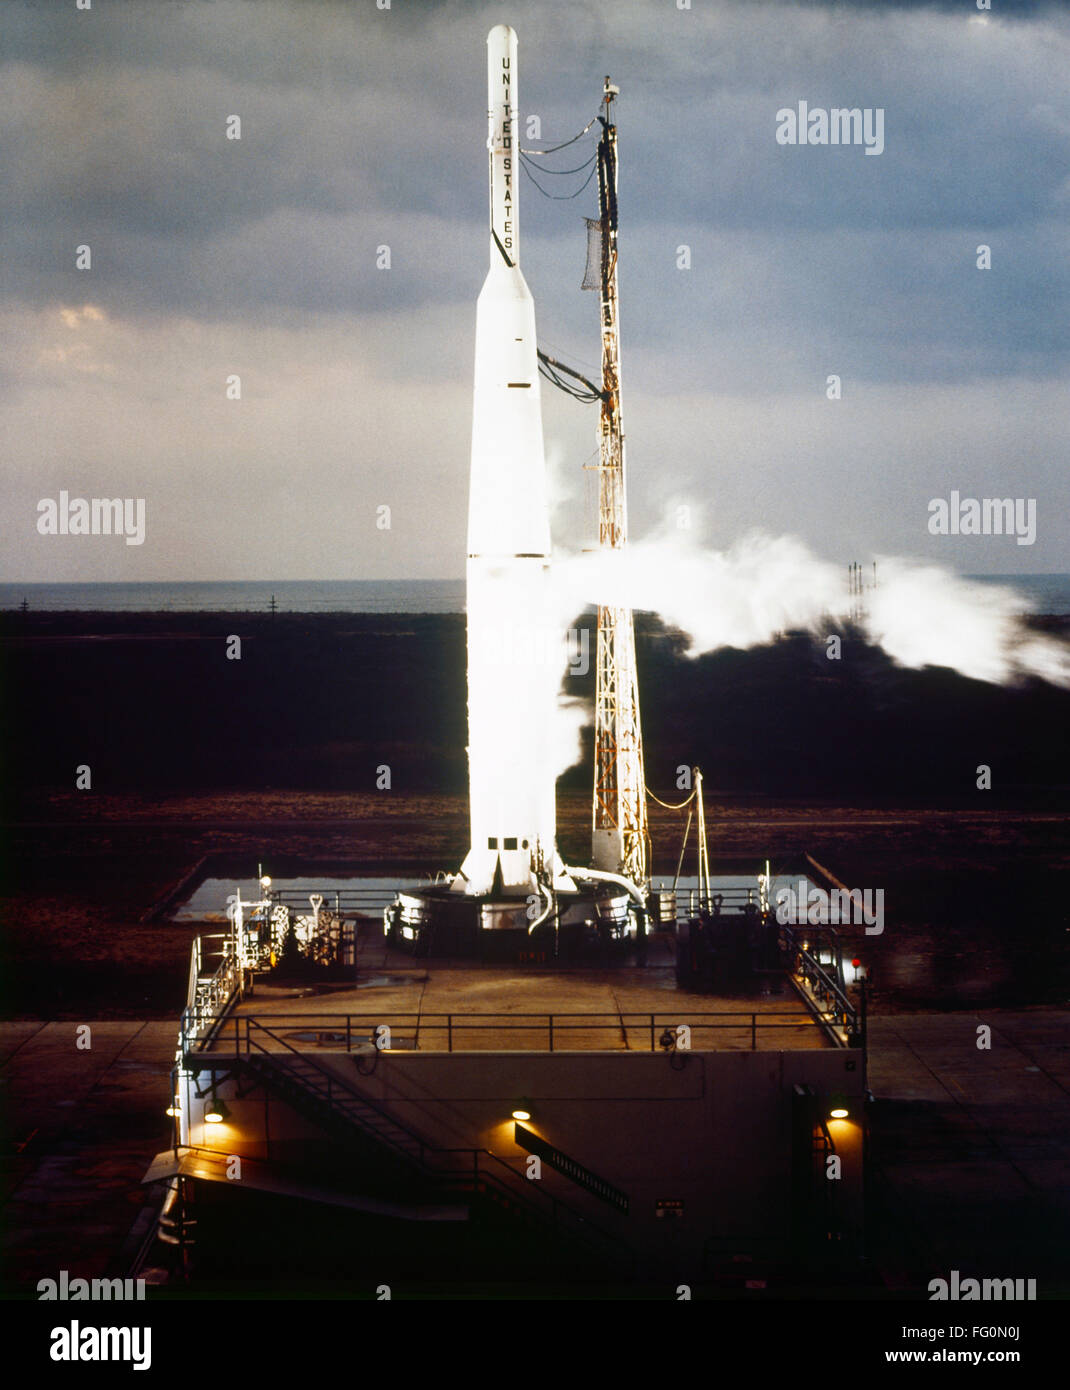 PIONEER V: LAUNCH, 1960. /nLaunch of the Pioneer V space probe aboard a Thor rocket from Cape Canaveral, Florida. Photograph, 1960. Stock Photo